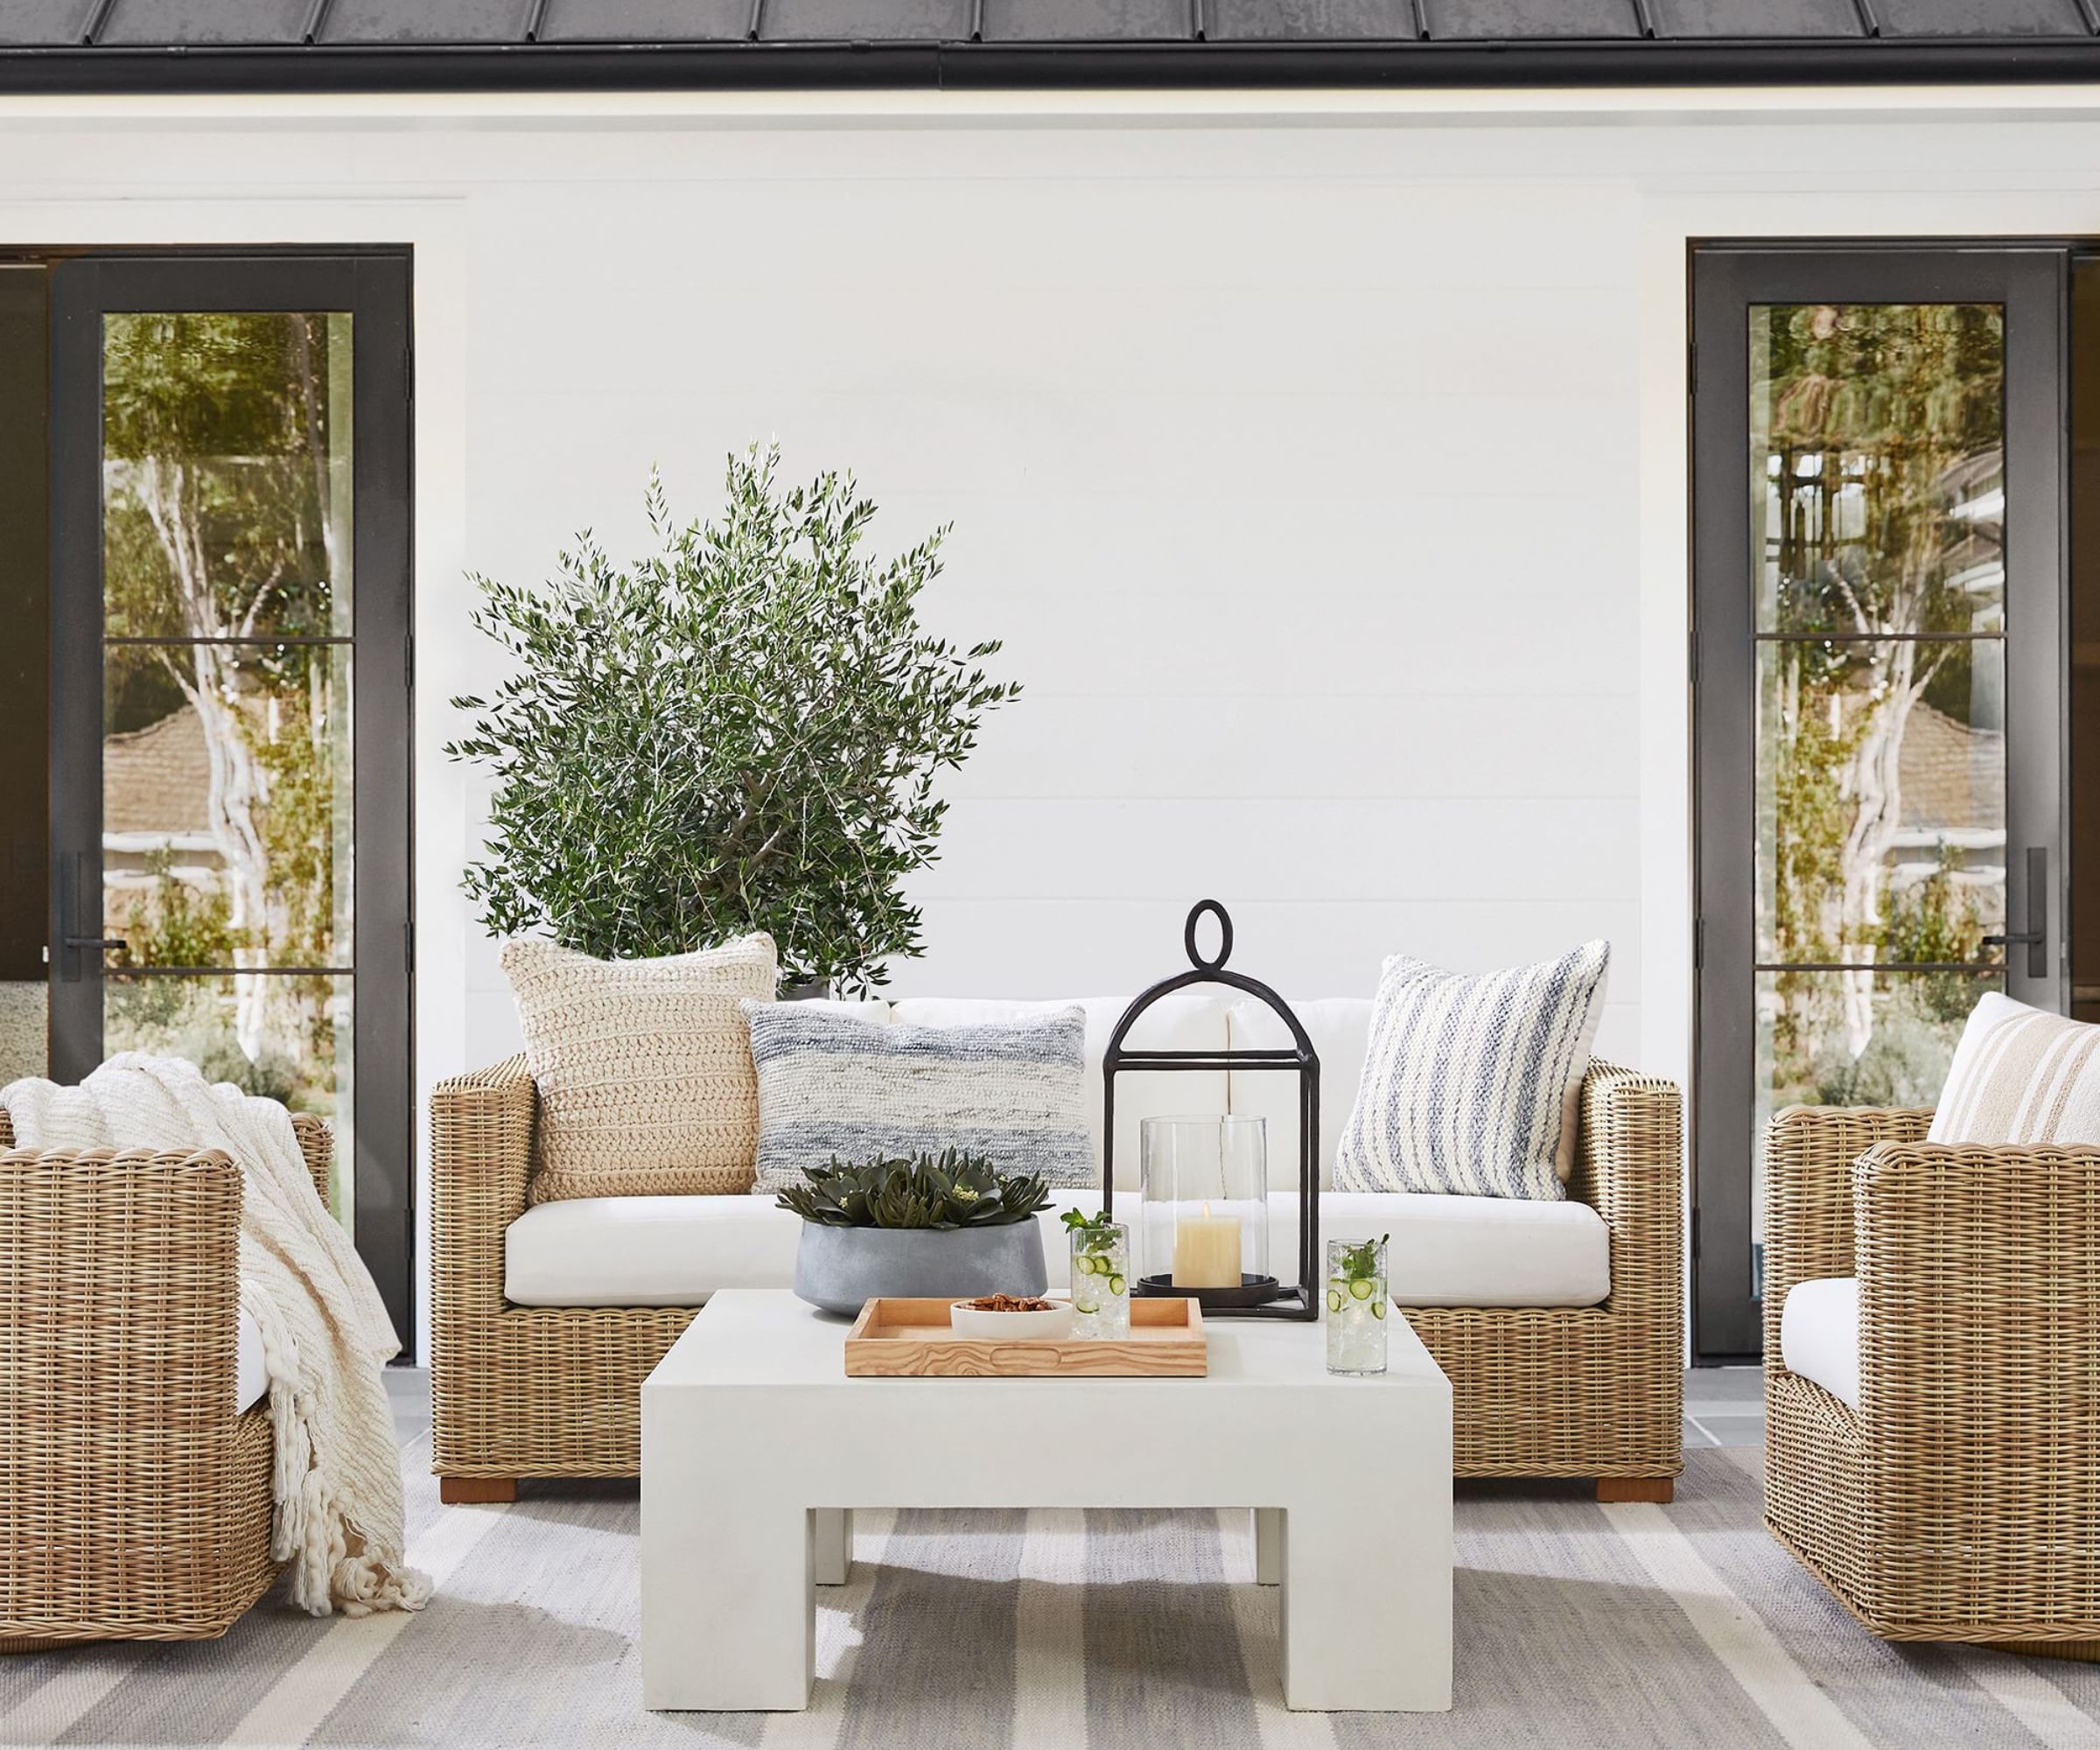 Pottery Barn outdoor lifestyle